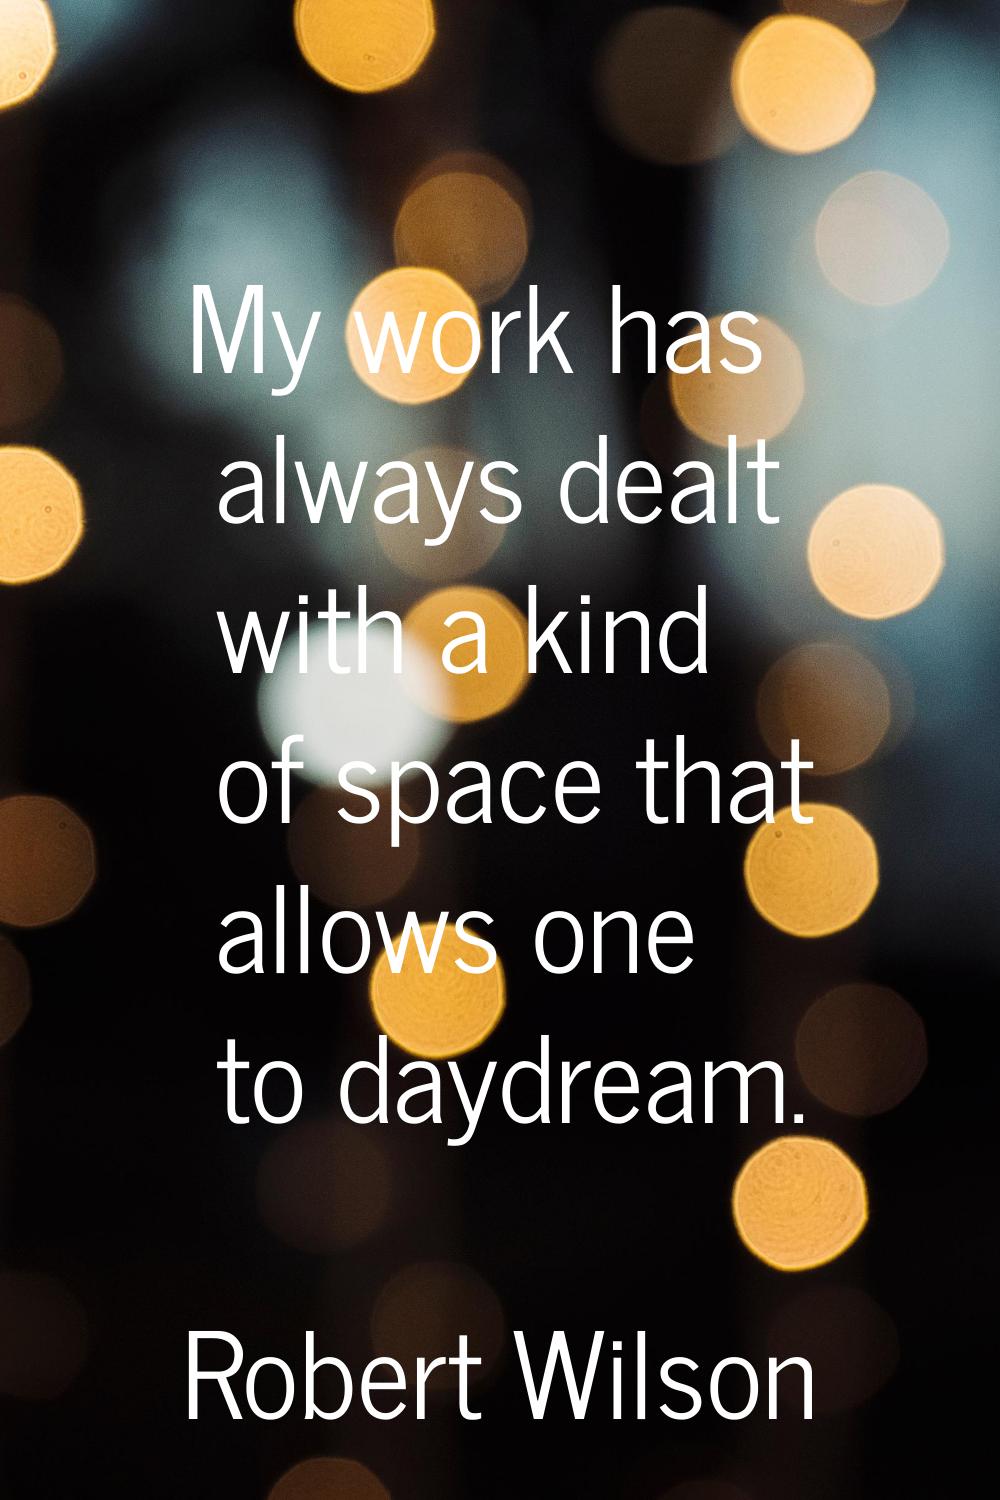 My work has always dealt with a kind of space that allows one to daydream.